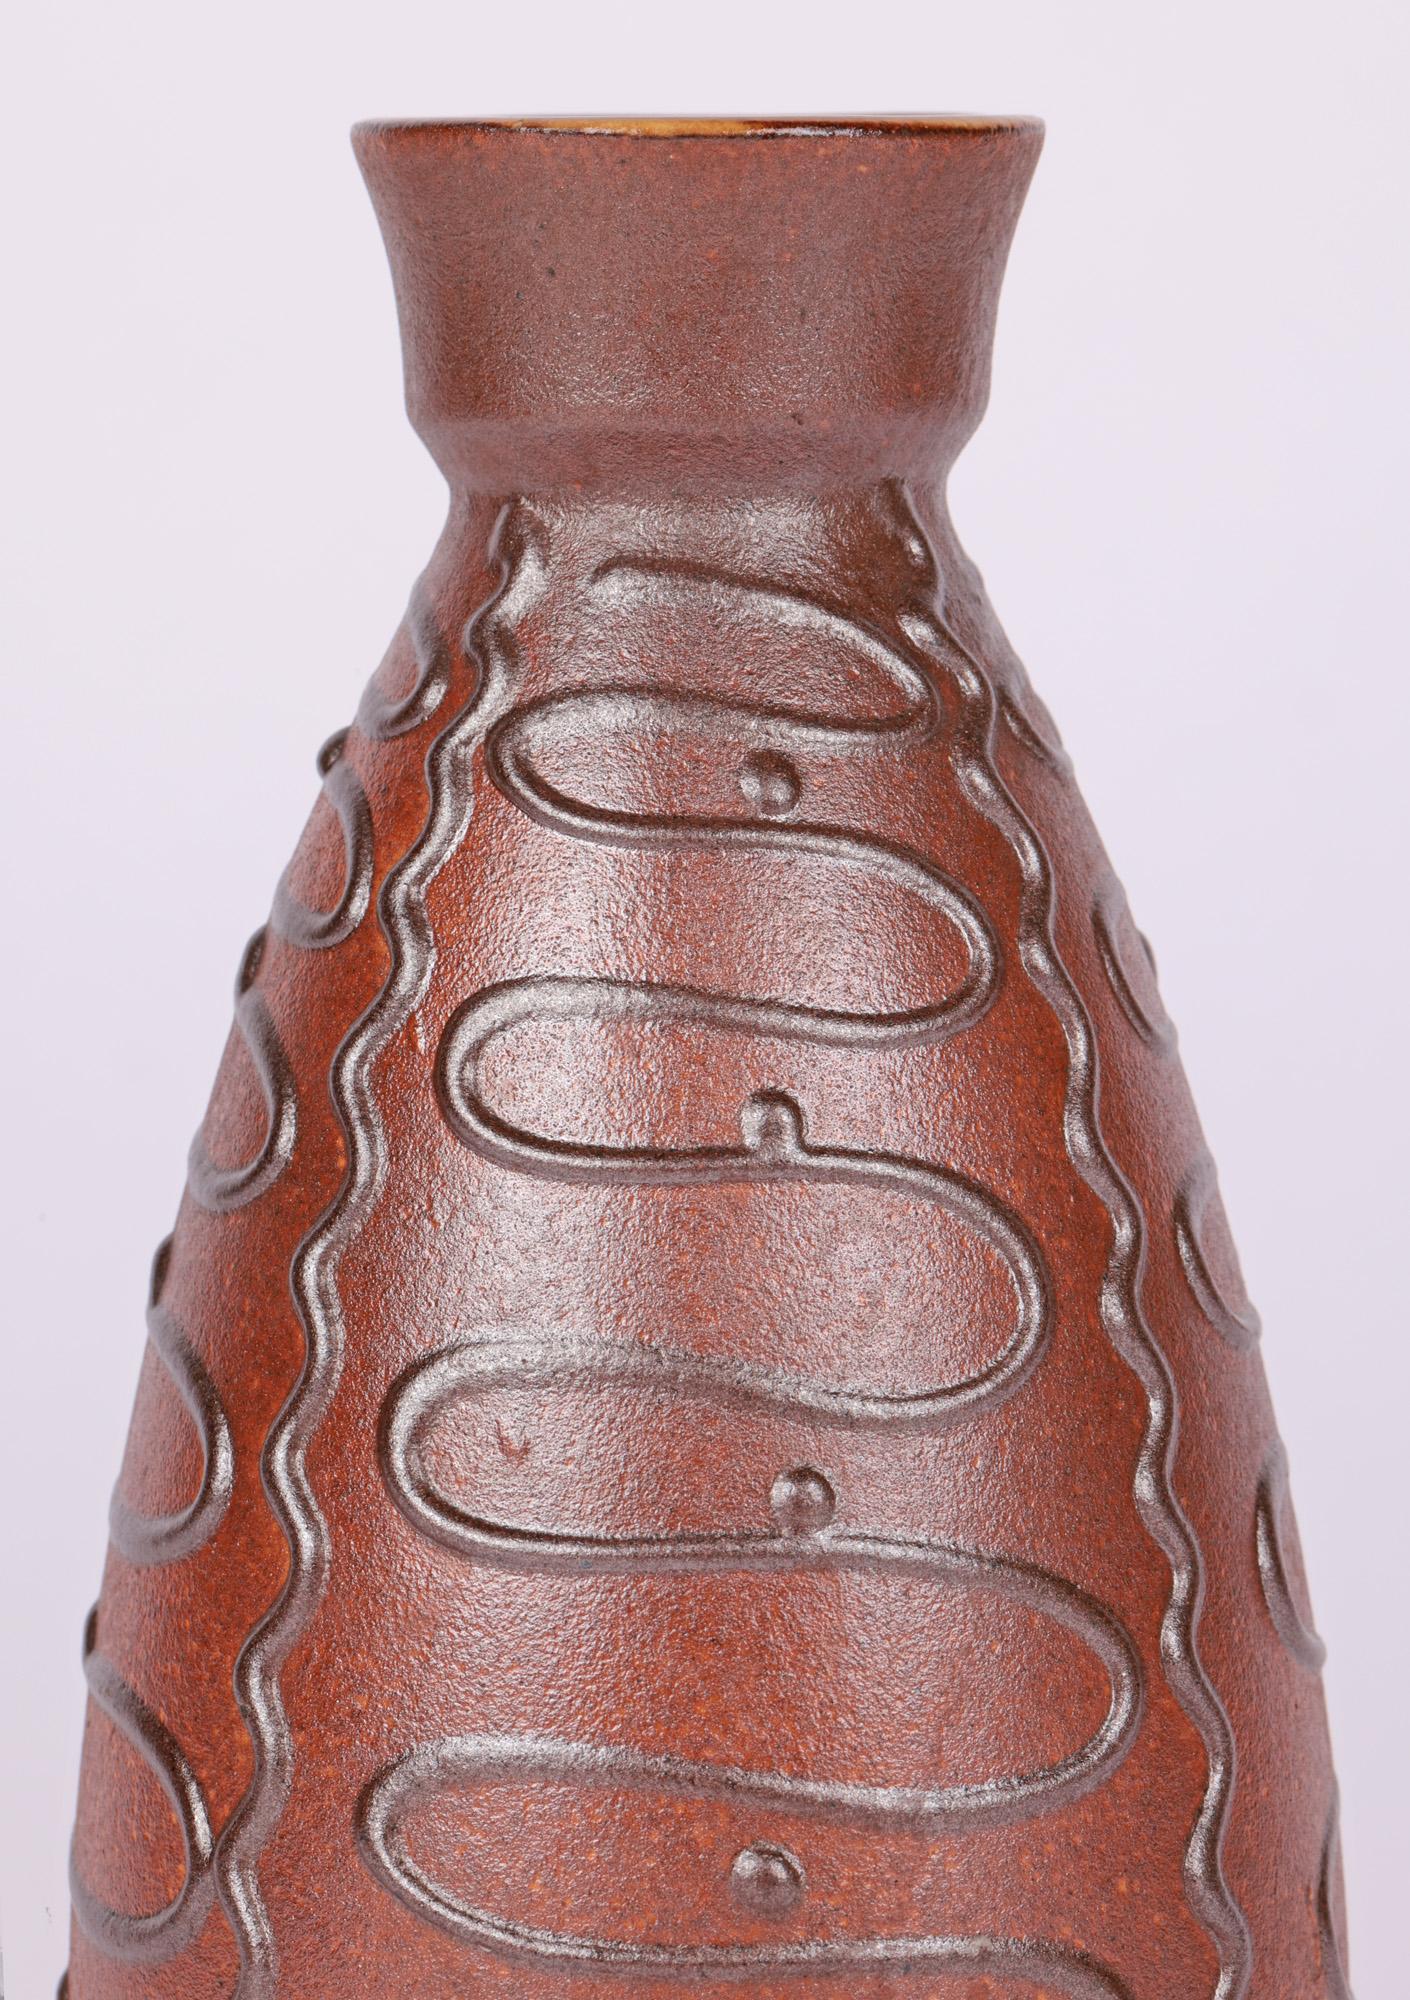 A personal favorite is this very stylish West German mid-century art pottery vase by Emons Söhne Keramik and probably dating around 1960. The finely made ceramic vase stands on a narrow round unglazed foot with slightly recessed base and is of tall